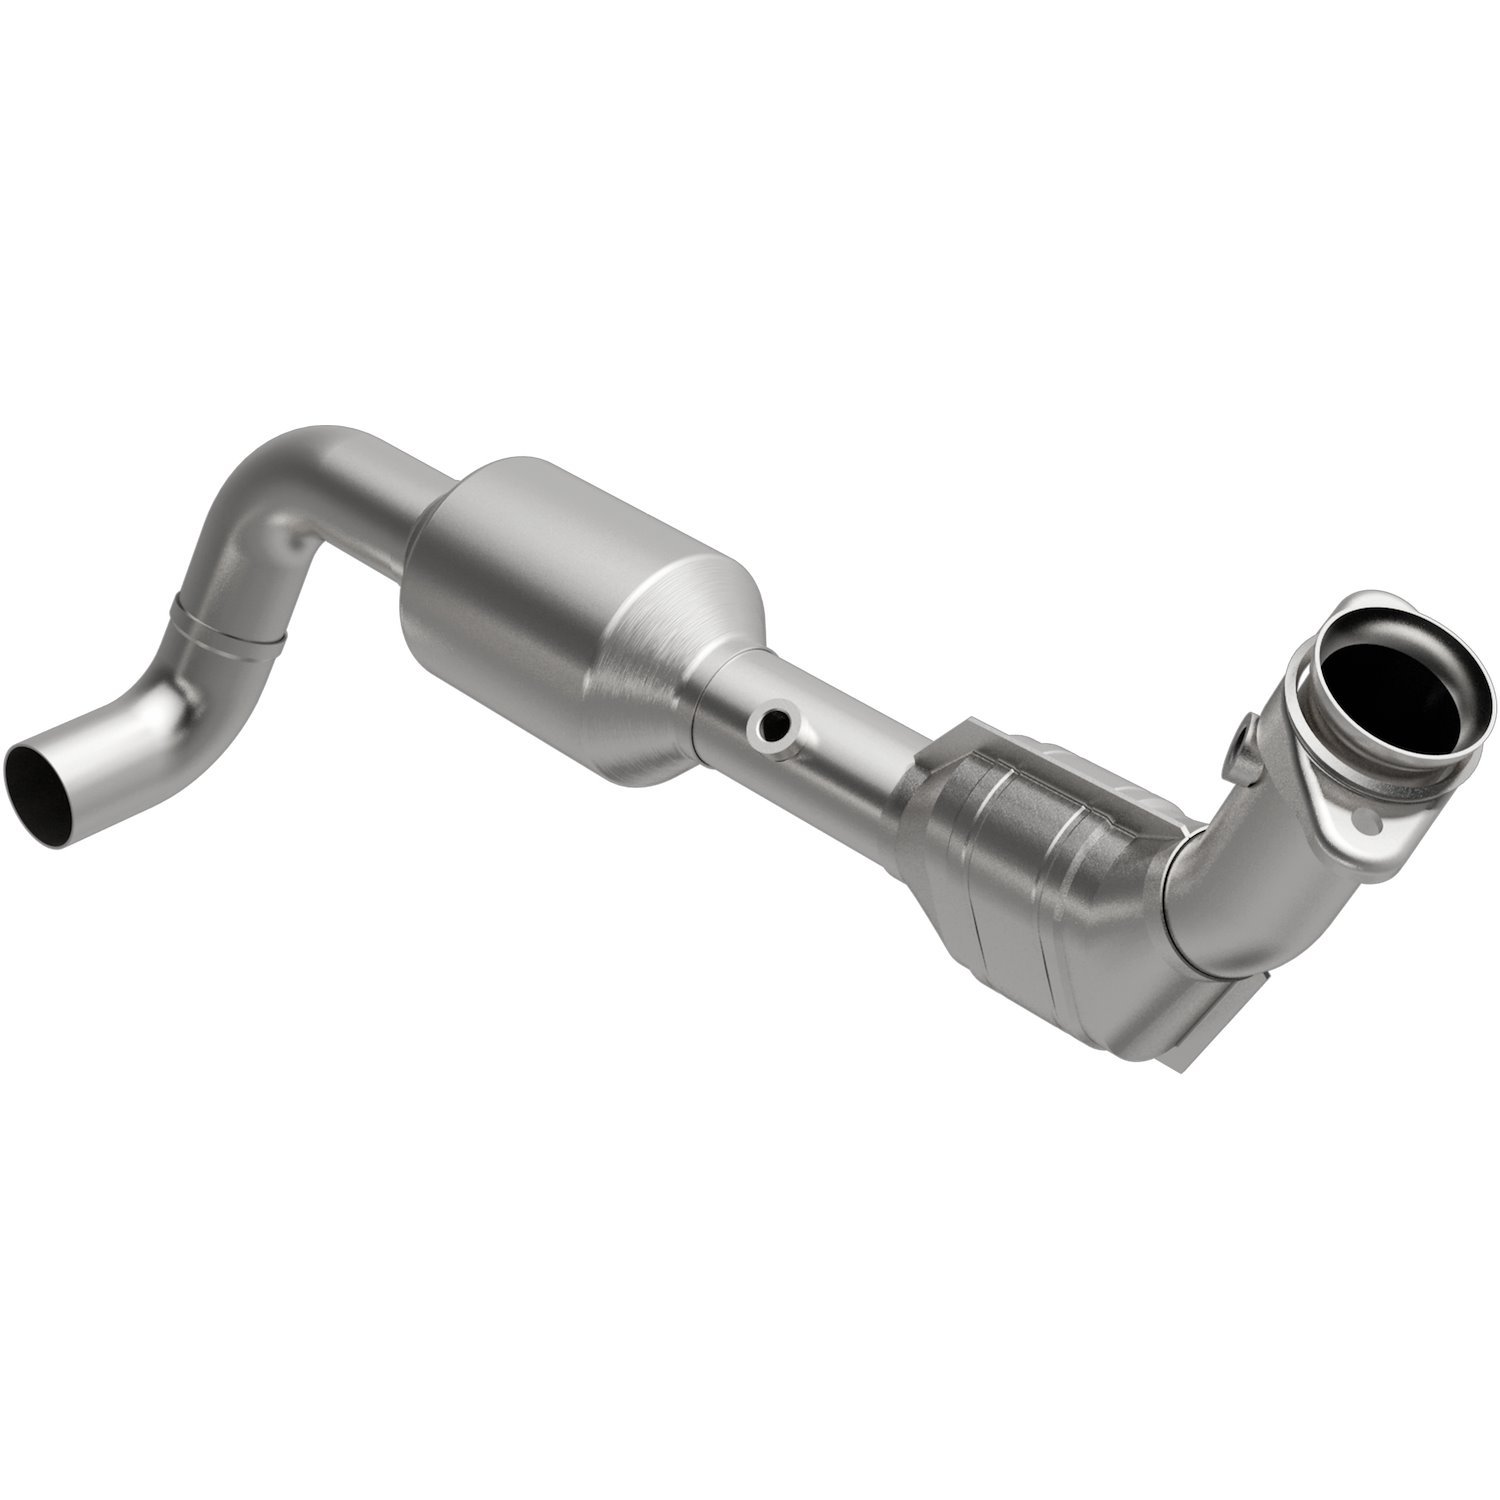 2004-2006 Ford F-150 OEM Grade Federal / EPA Compliant Direct-Fit Catalytic Converter